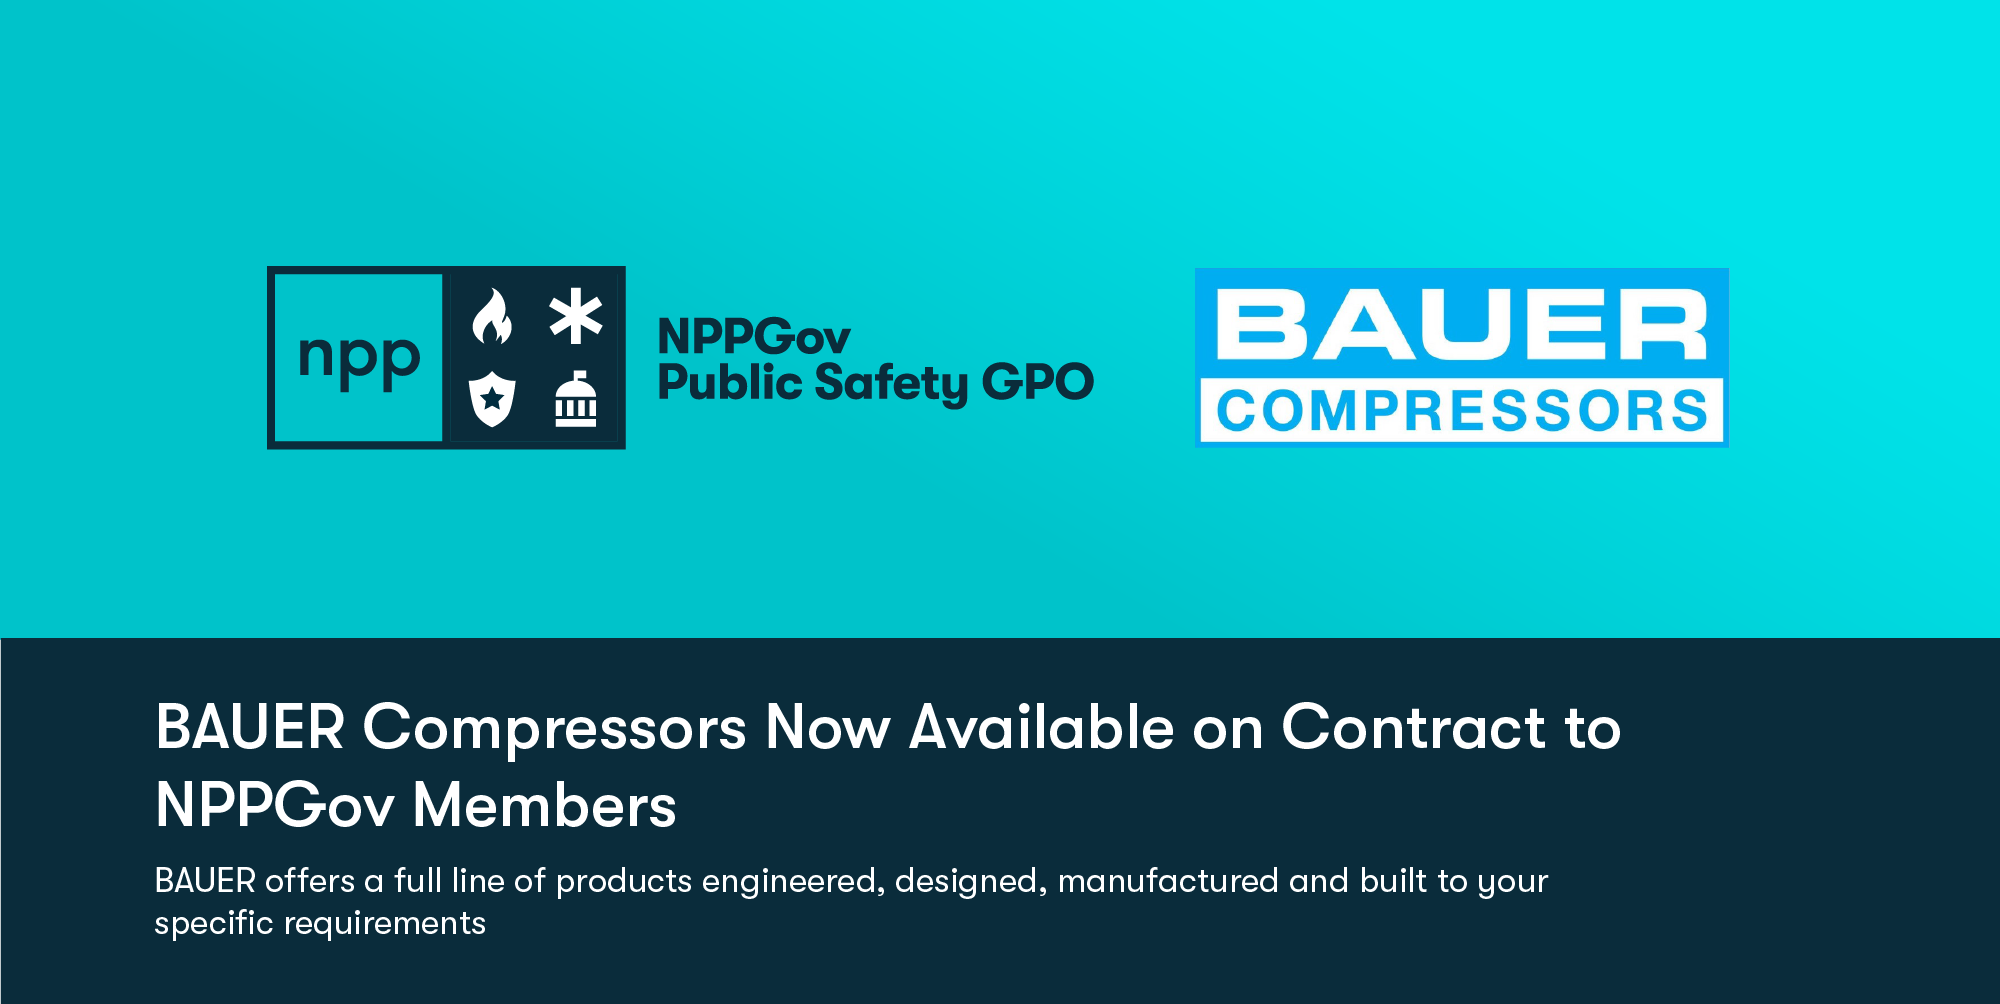 BAUER Compressors Joins NPPGov as an Approved Vendor Specializing in High-Pressure Systems